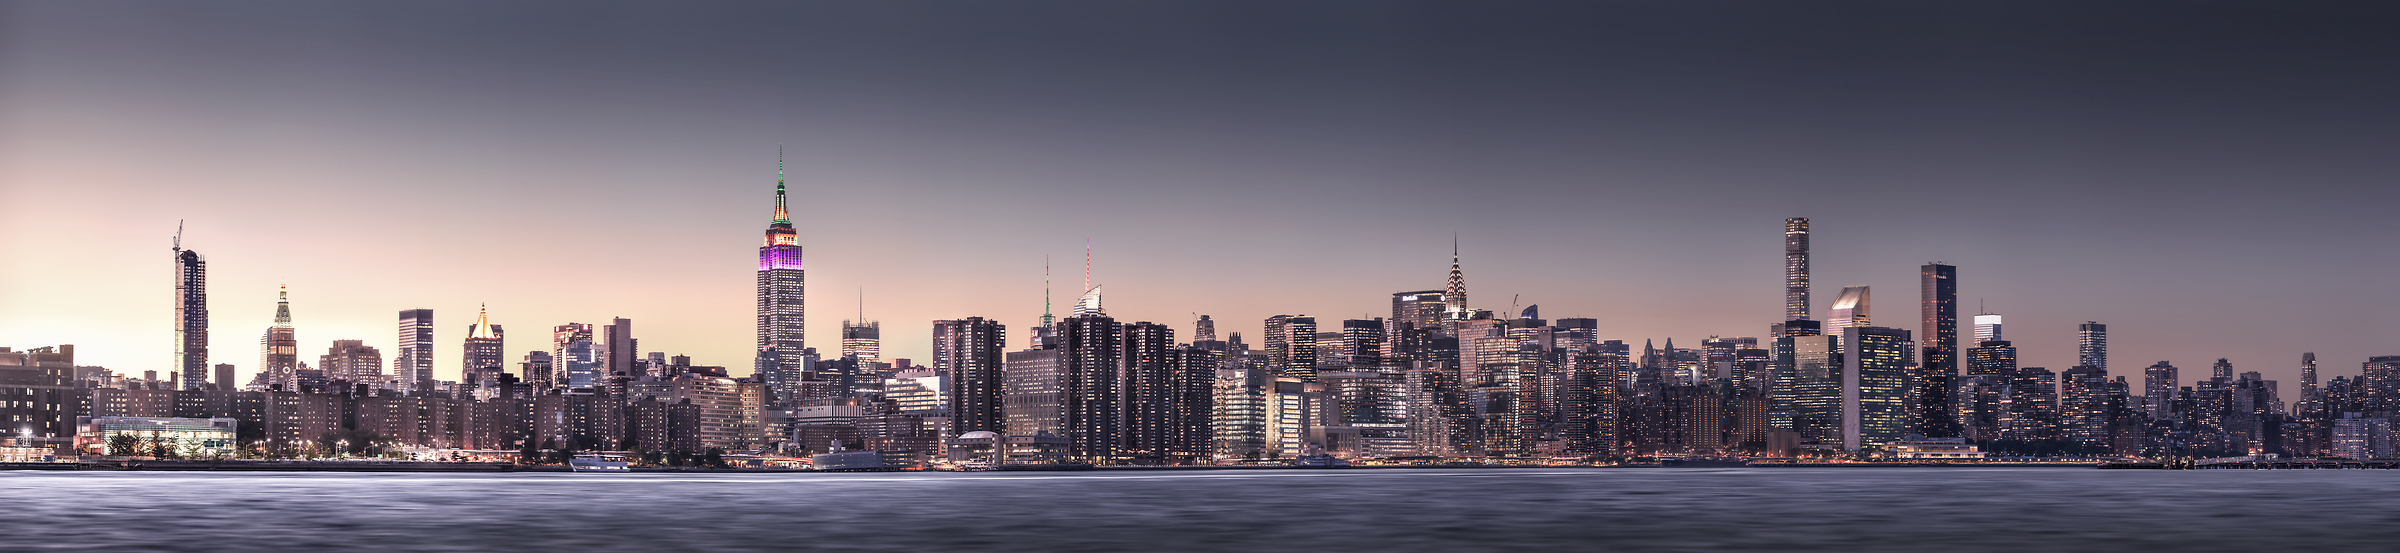 1,946 megapixels! The highest resolution cityscape VAST photo of the Midtown Manhattan city skyline in the evening sunset in New York City; created by Dan Piech